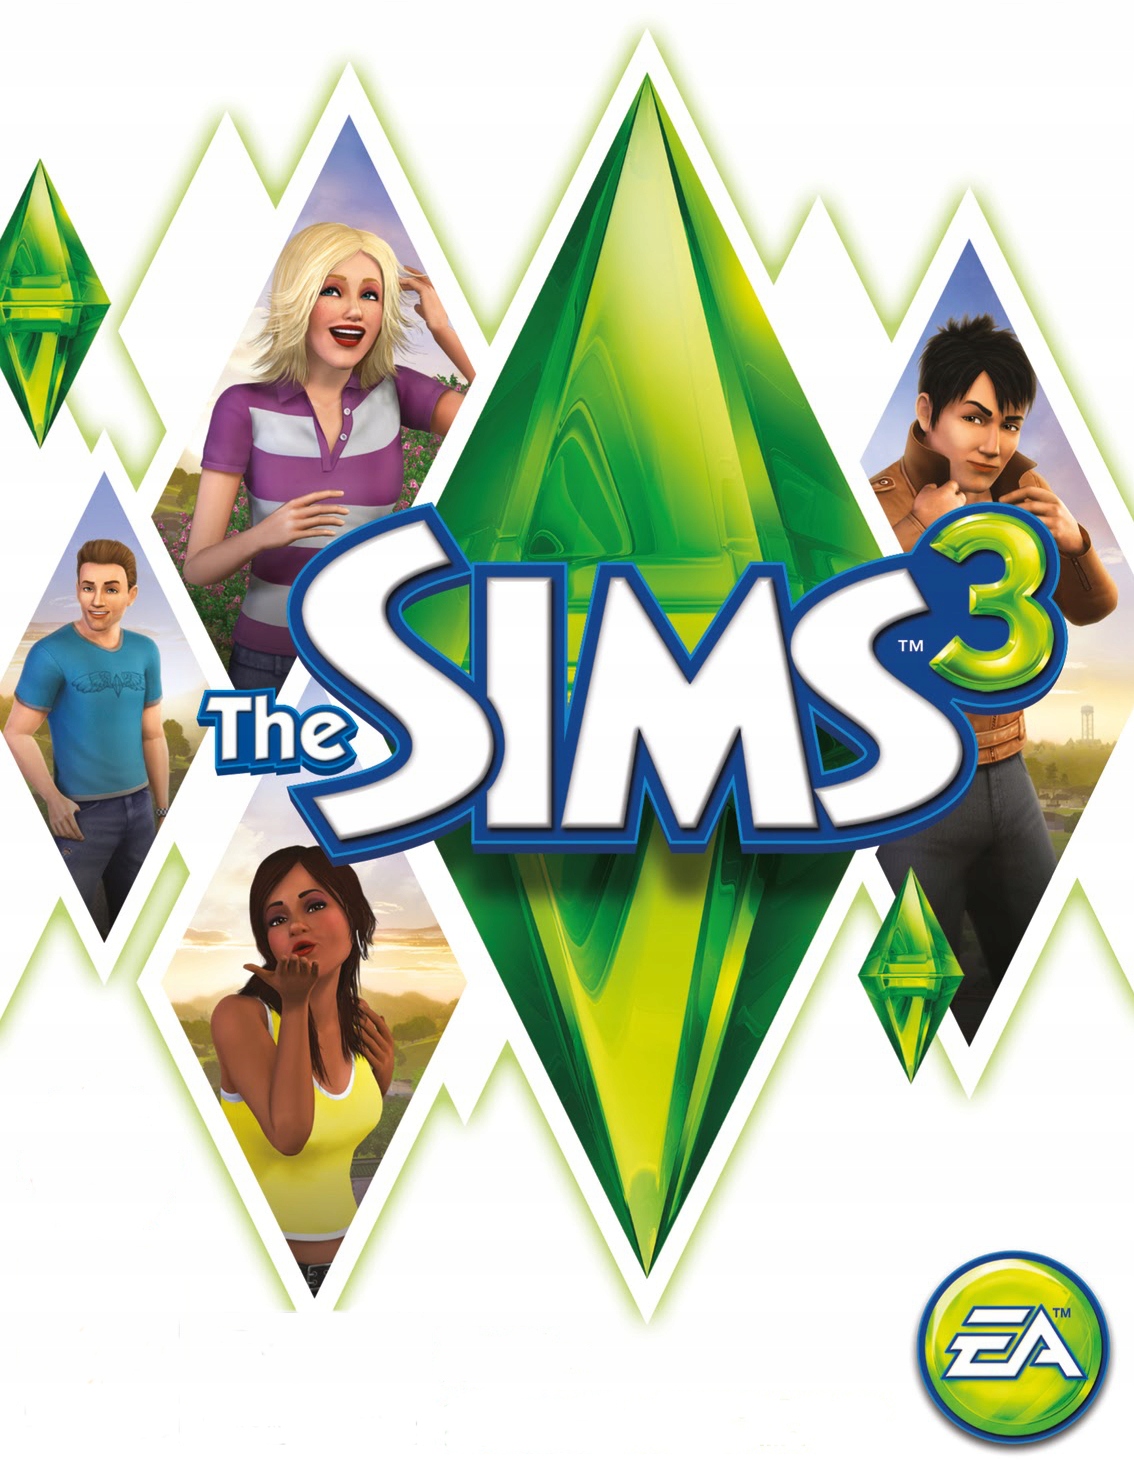 pirate bay sims 3